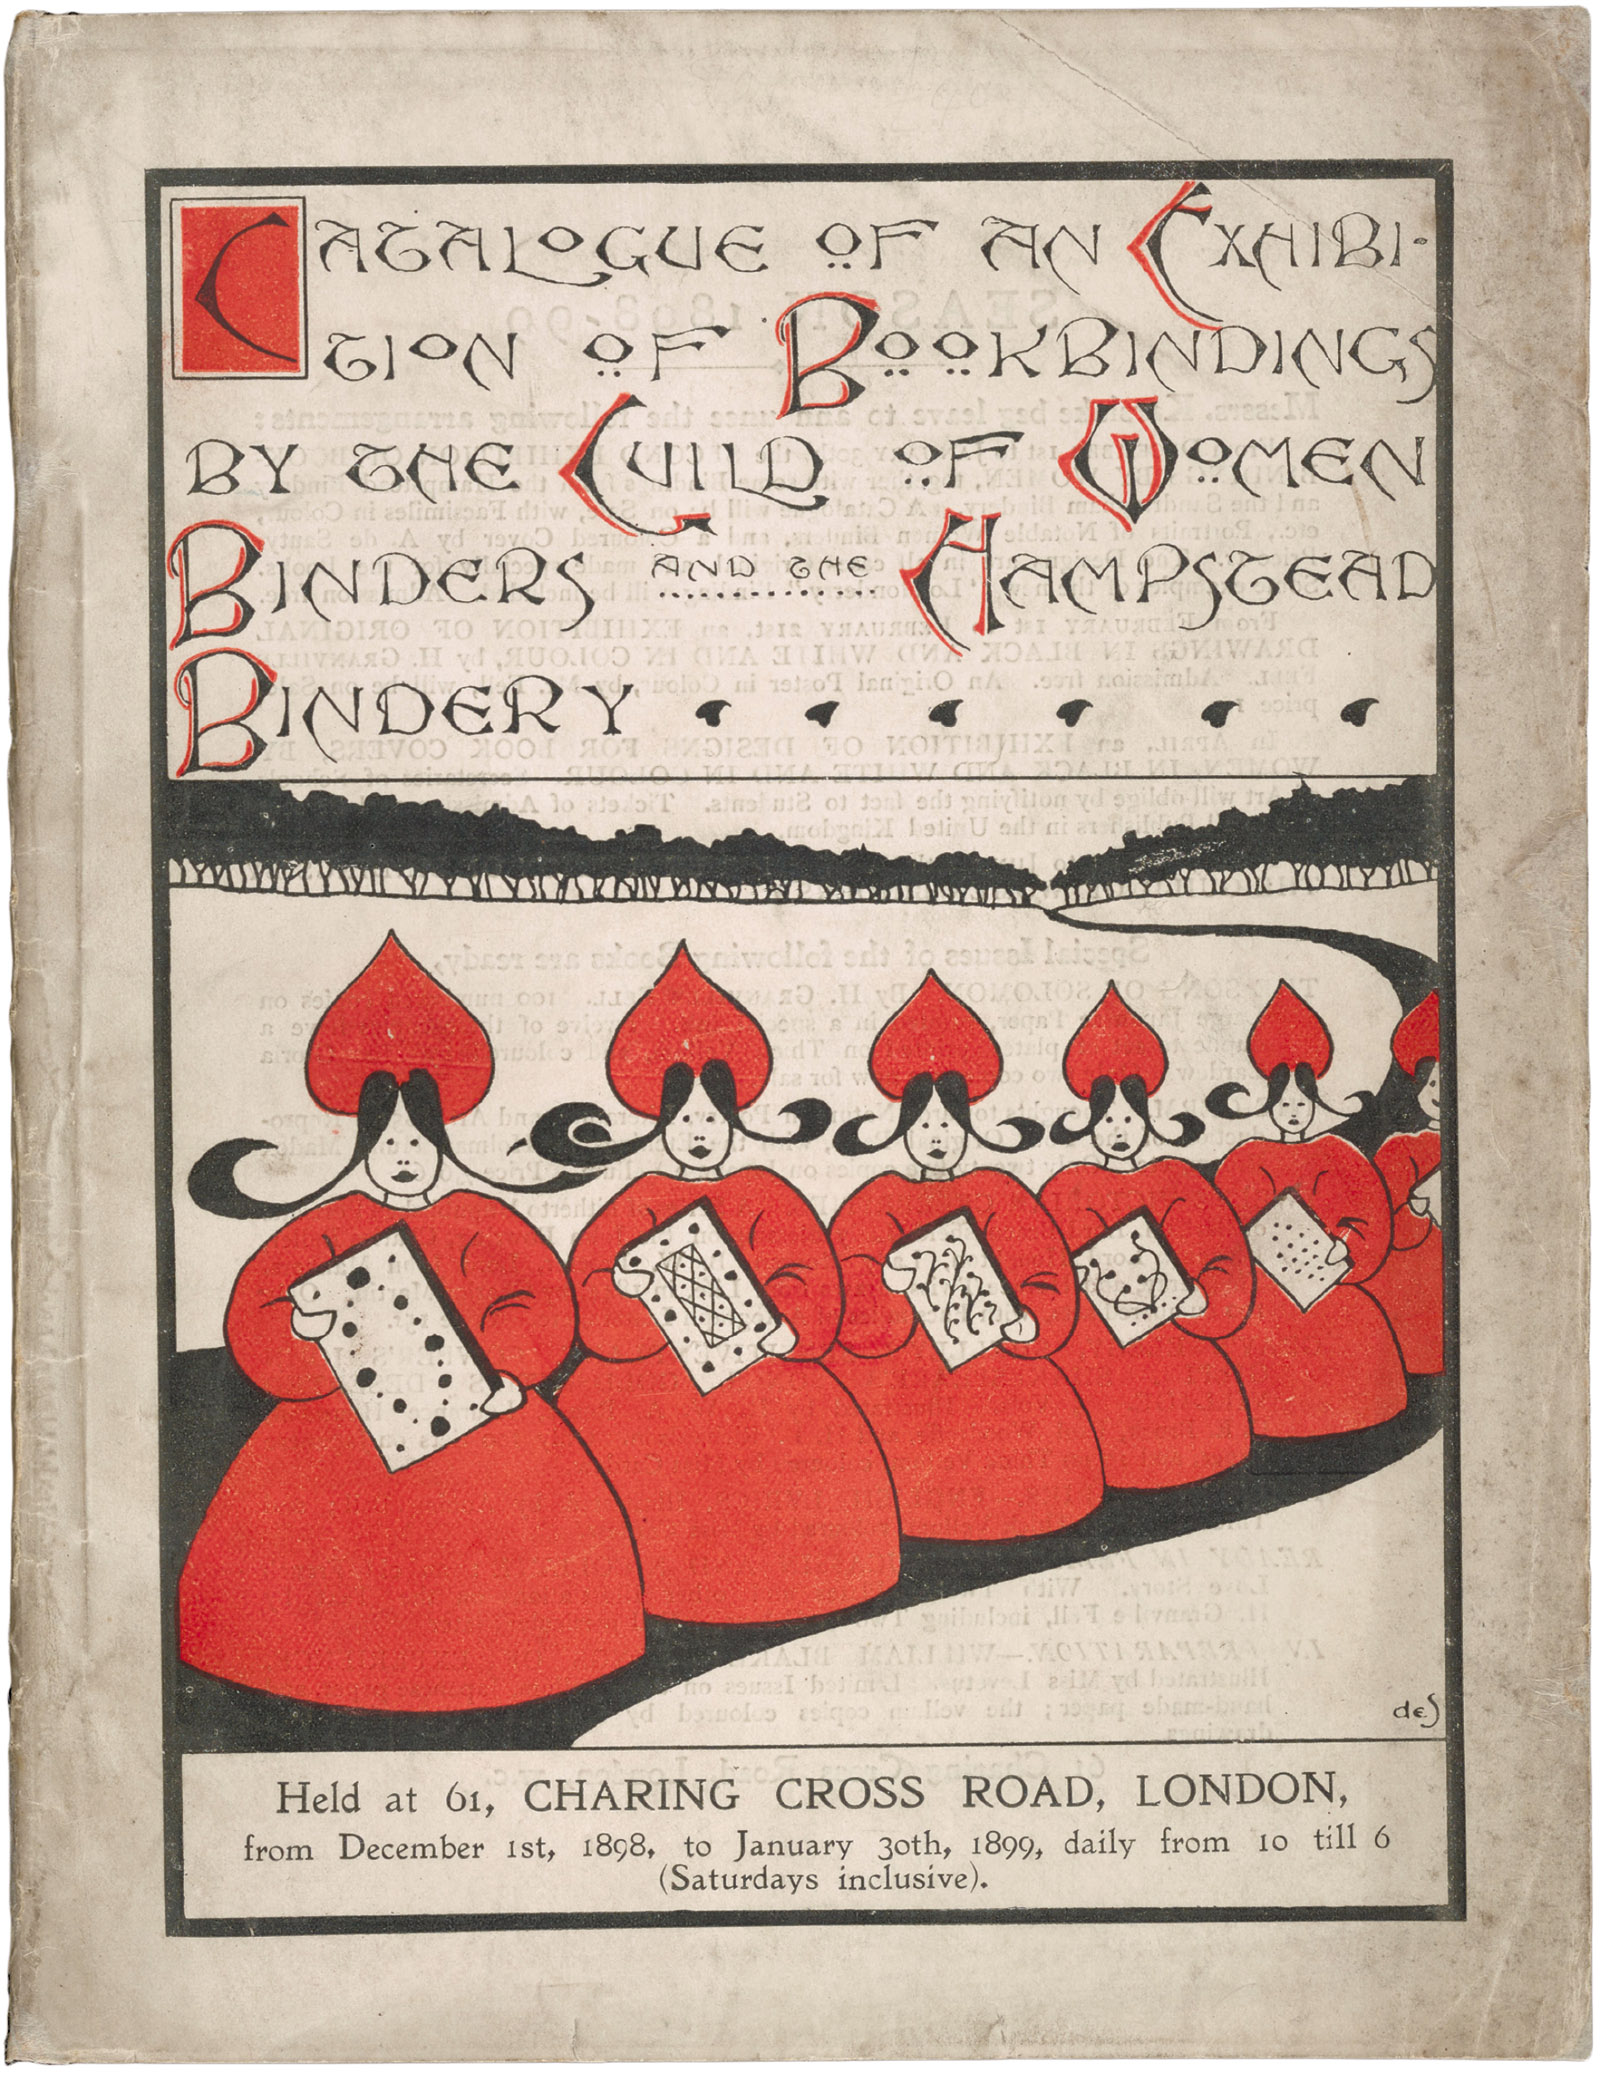 Cover of the catalog for the second Exhibition of Artistic Bookbinding by Women